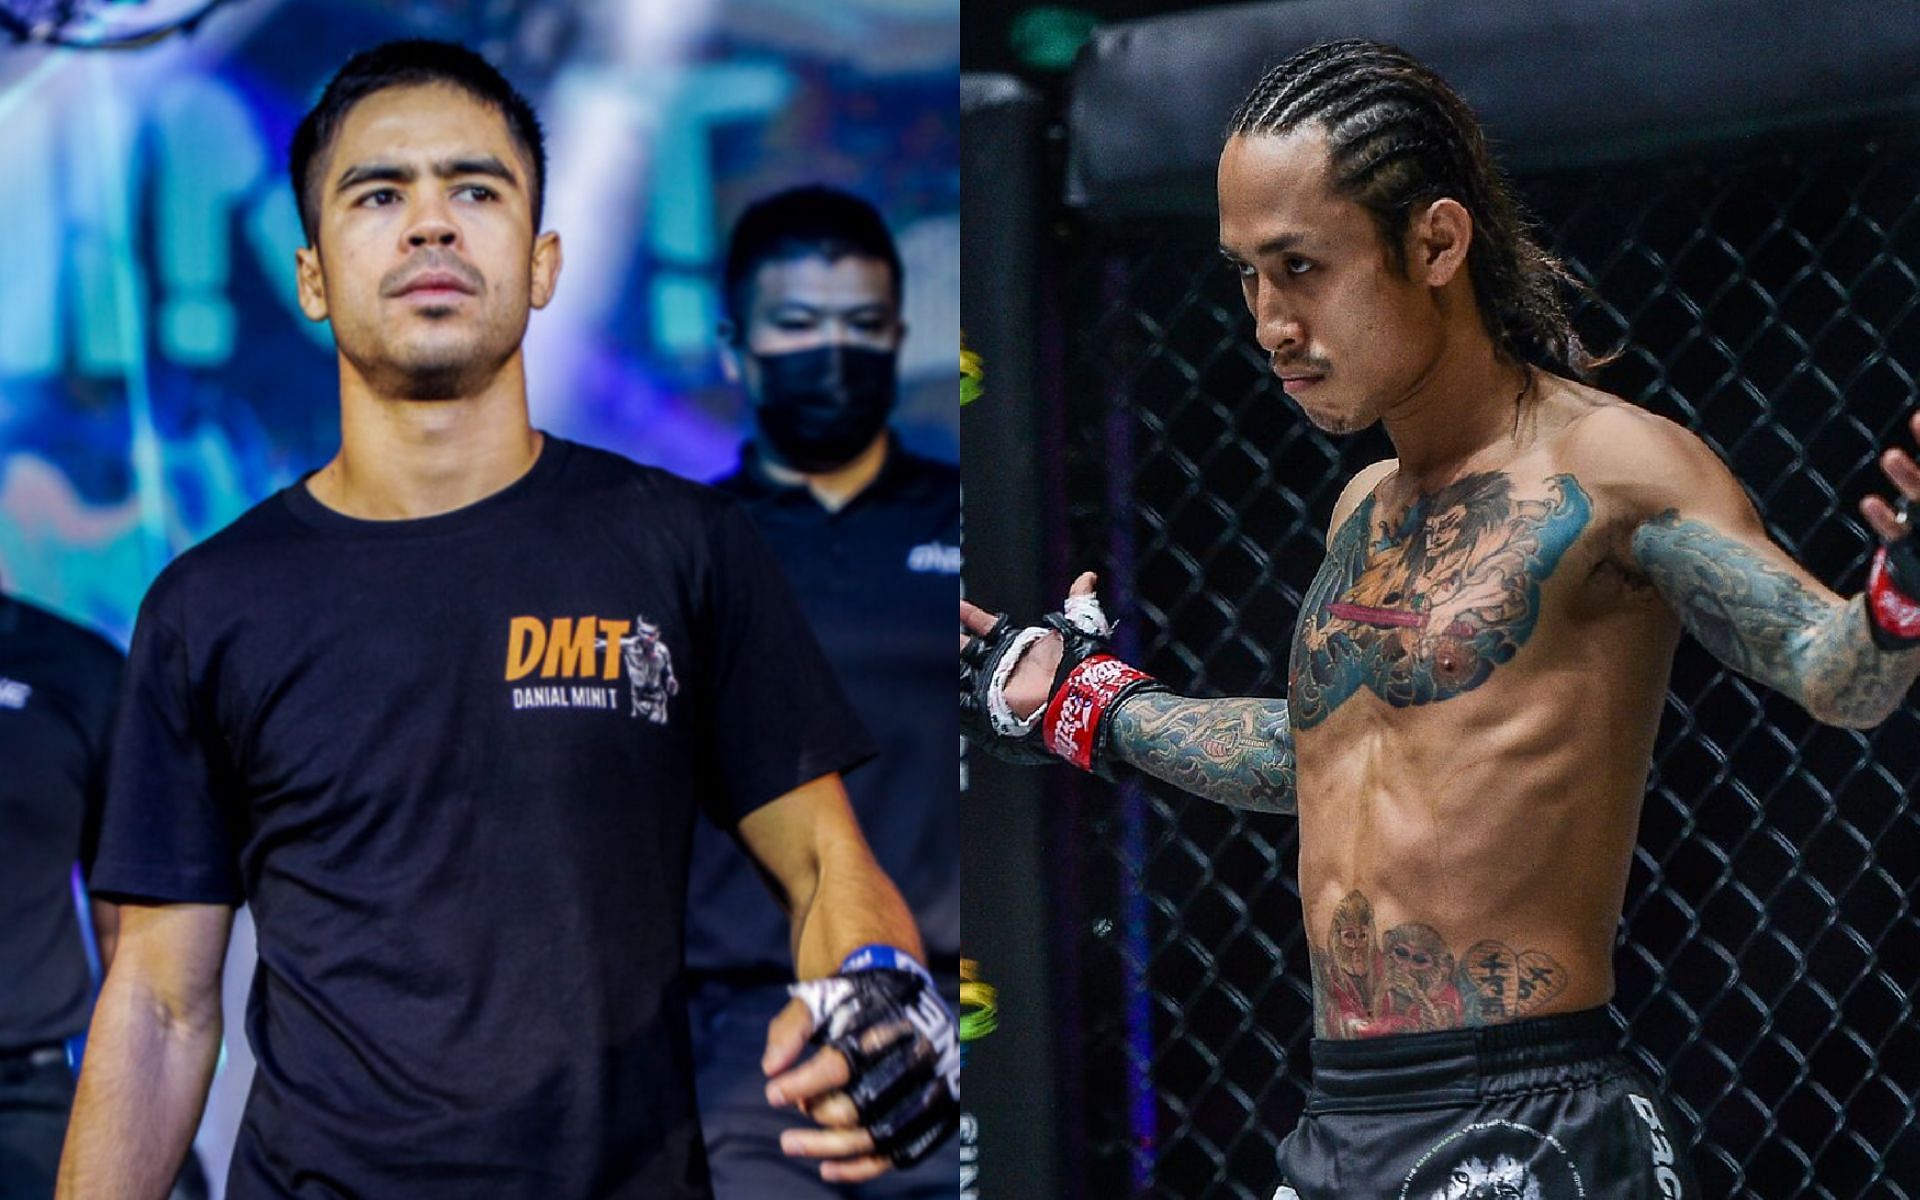 Danial Williams (left) is expecting a high-octane matchup against Namiki Kawahara (right) [Photos via ONE Championship]